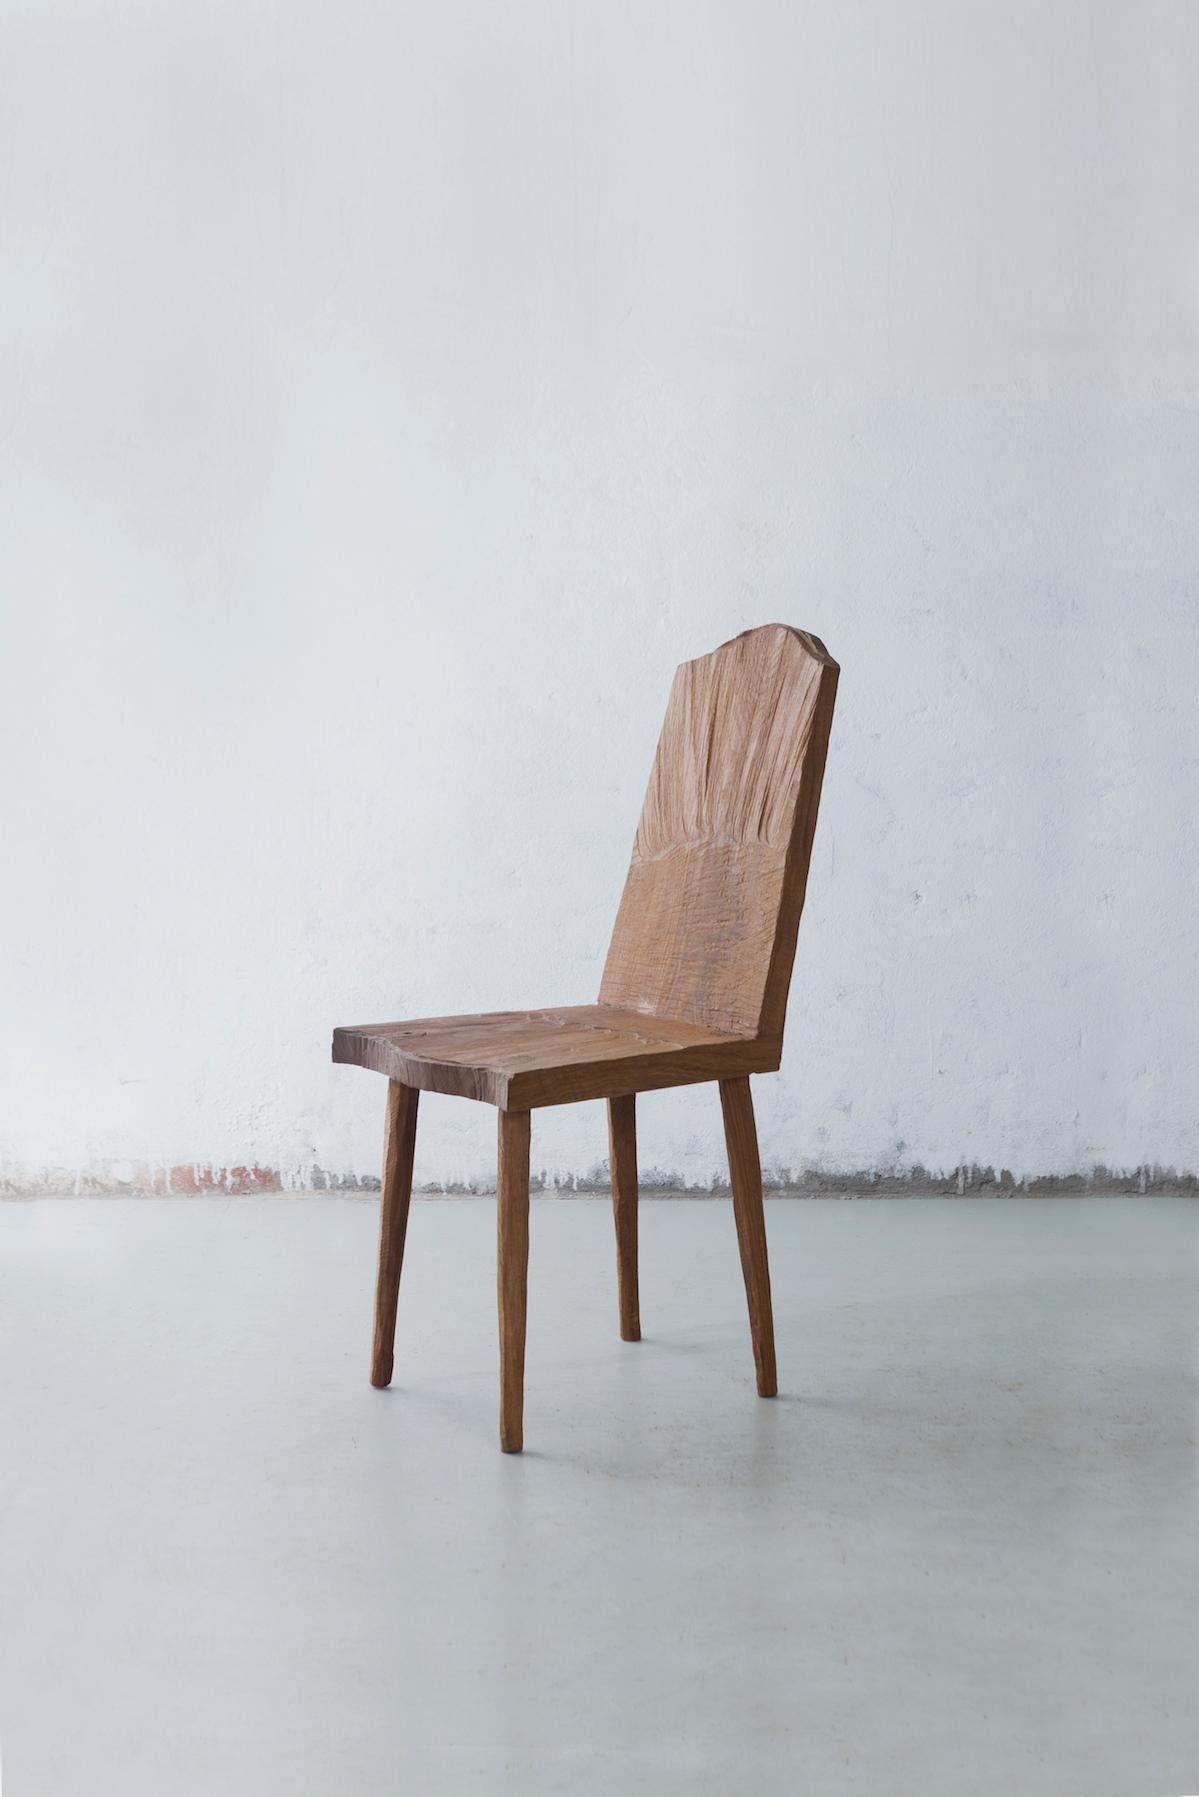 Chair made of solid oak (+ linseed oil)
(Outdoor use OK)

Dimensions : H. 82 x 48 x 48 cm (SH. 45 cm)

SÓHA design studio conceives and produces furniture design and decorative objects in solid oak in an authentic style. Inspiration to create all